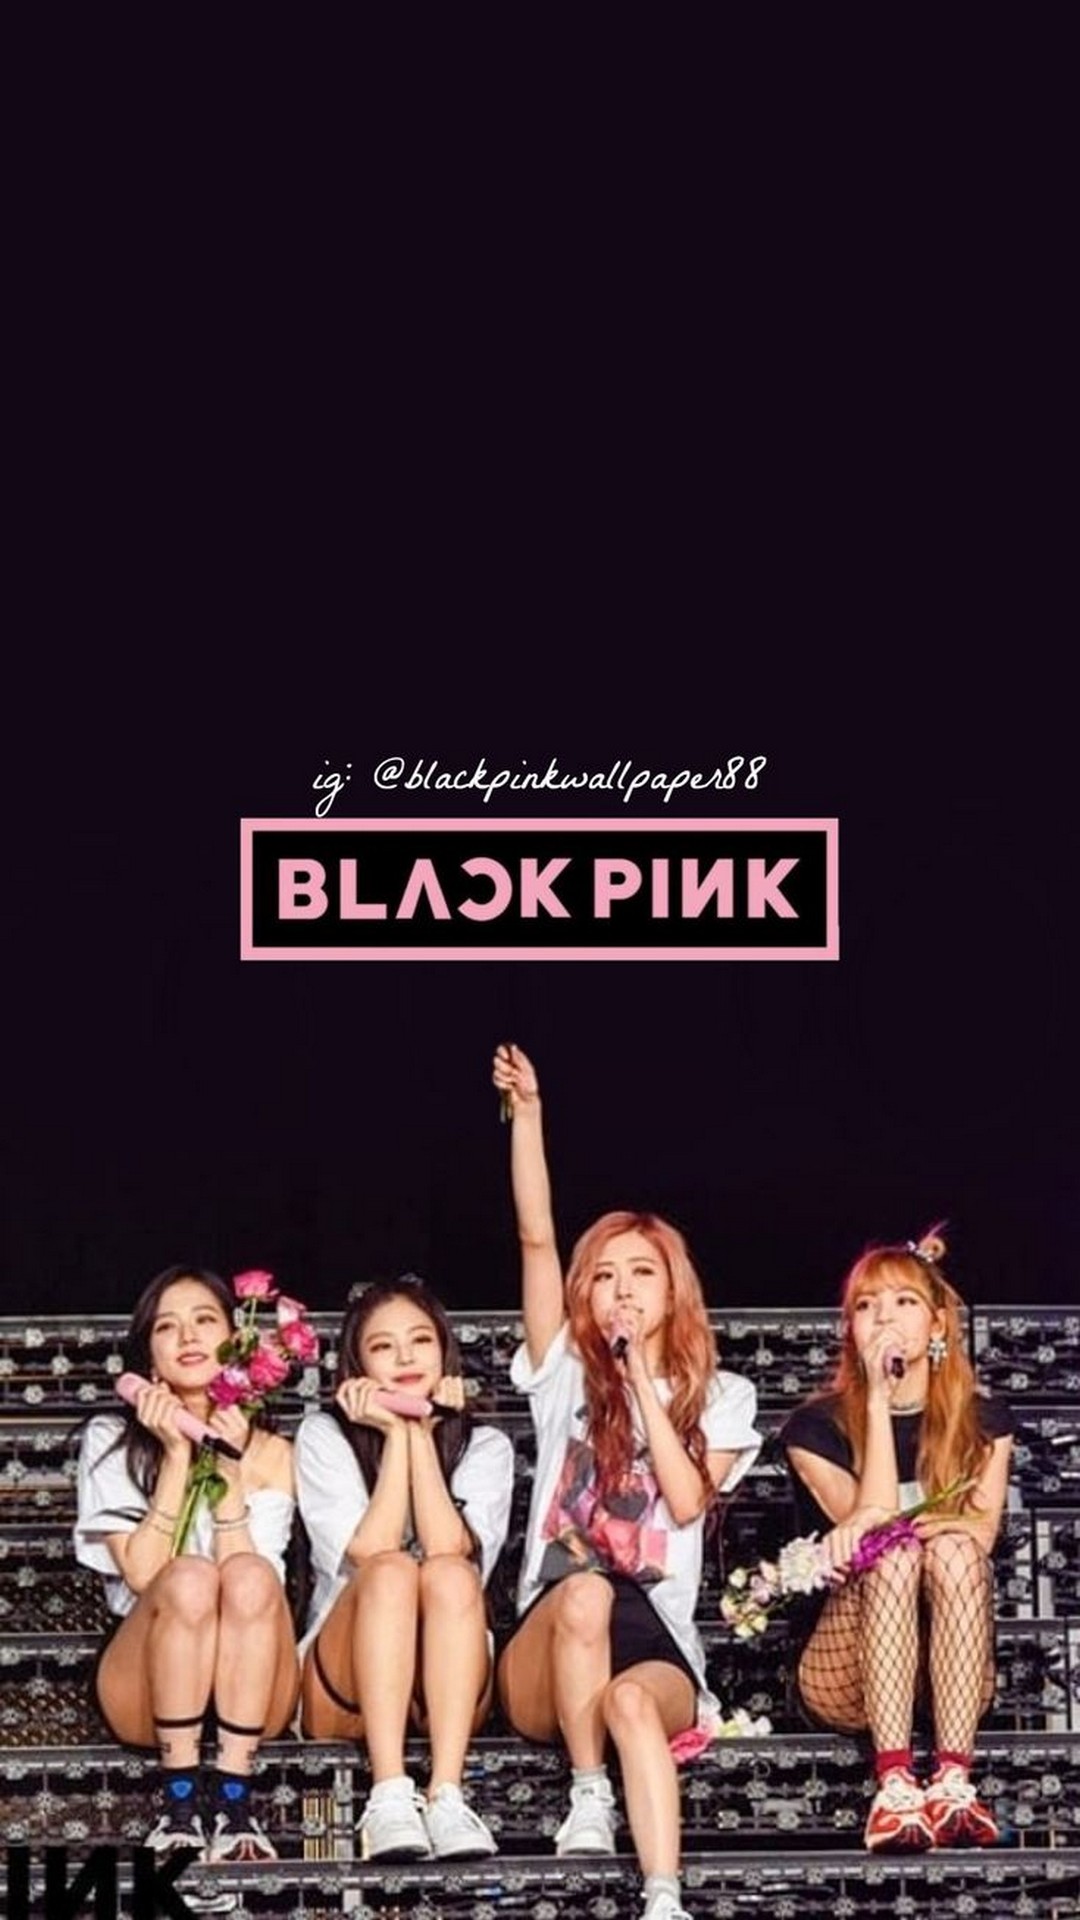 Blackpink iPhone Wallpaper Design with high-resolution 1080x1920 pixel. You can set as wallpaper for Apple iPhone X, XS Max, XR, 8, 7, 6, SE, iPad. Enjoy and share your favorite HD wallpapers and background images